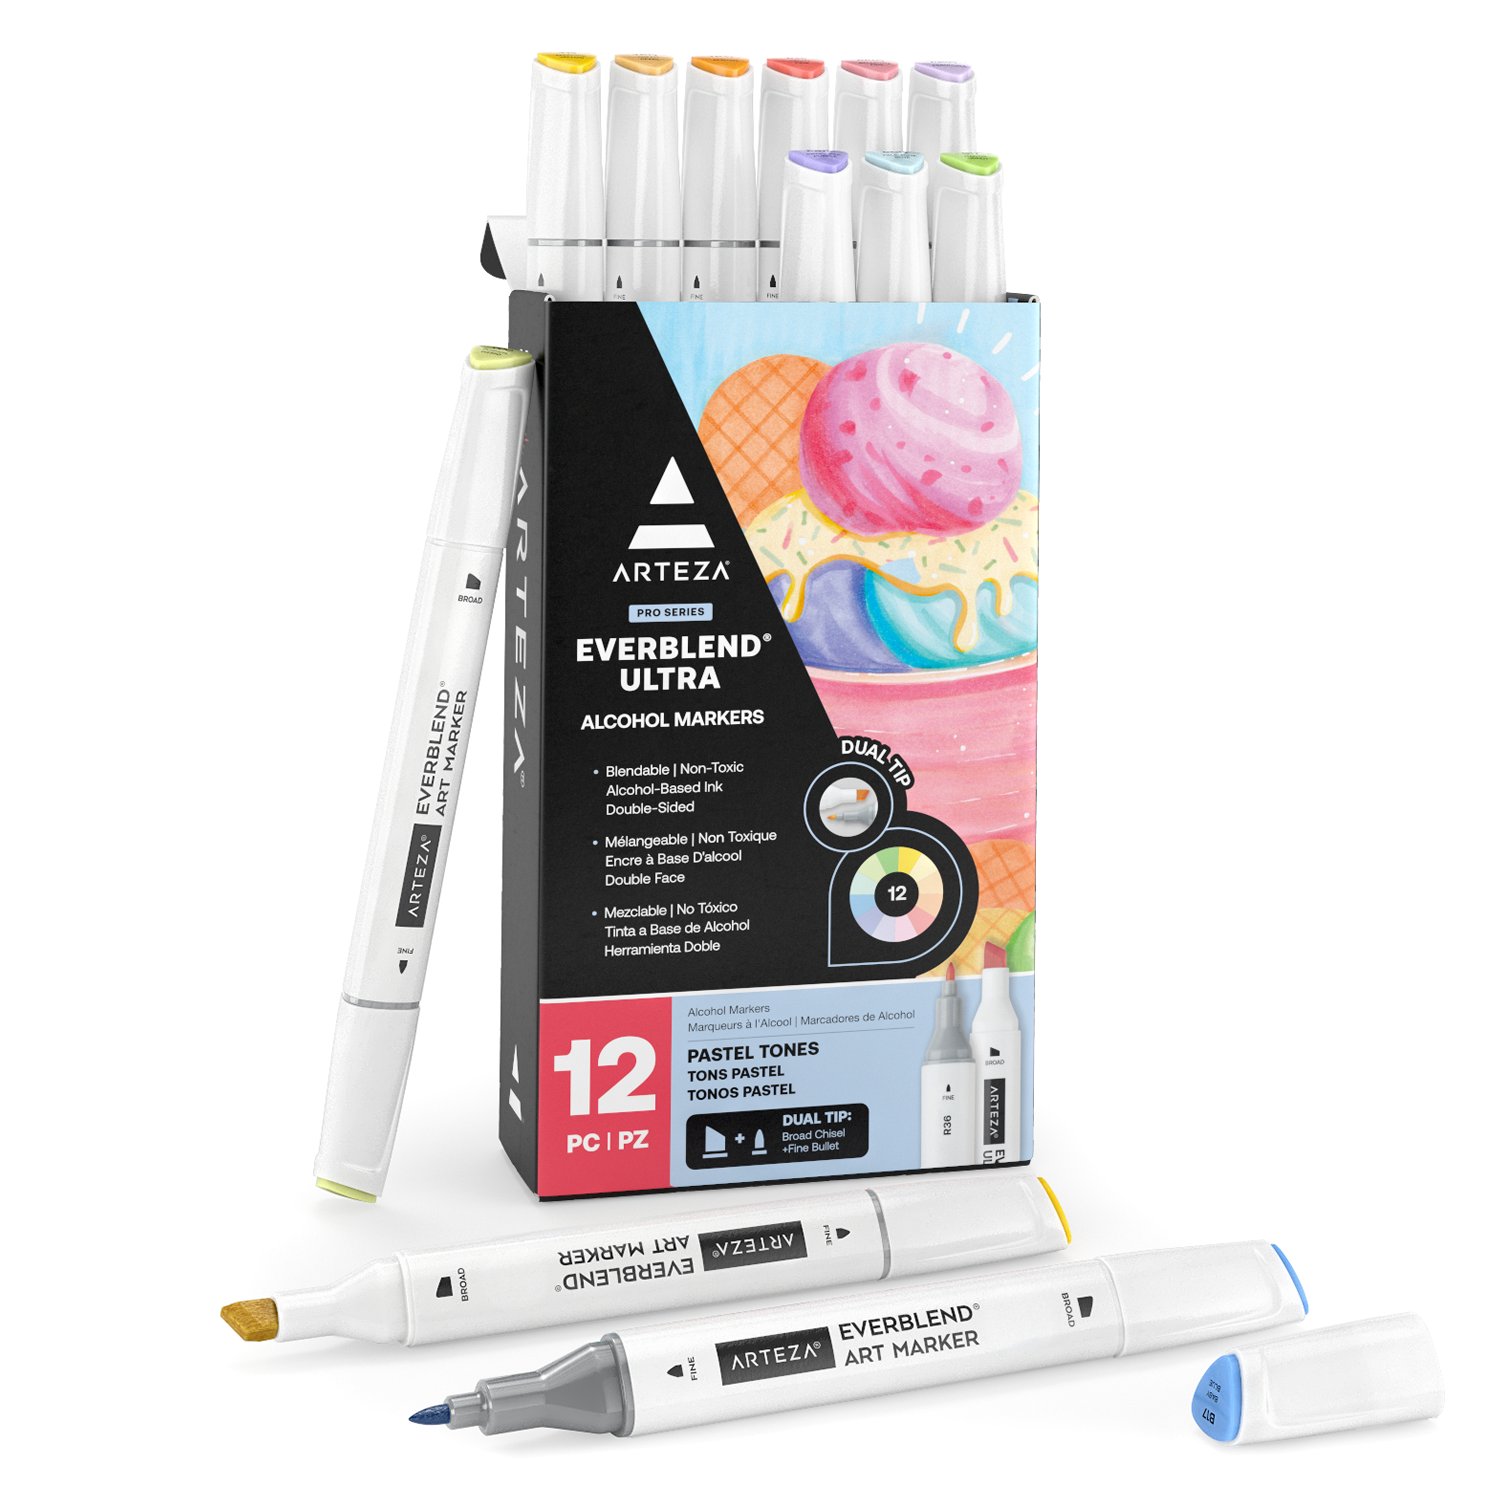 ArtSkills Dual-Tip Blendable Alcohol Markers with Colorless Blenders, 32 Ct  